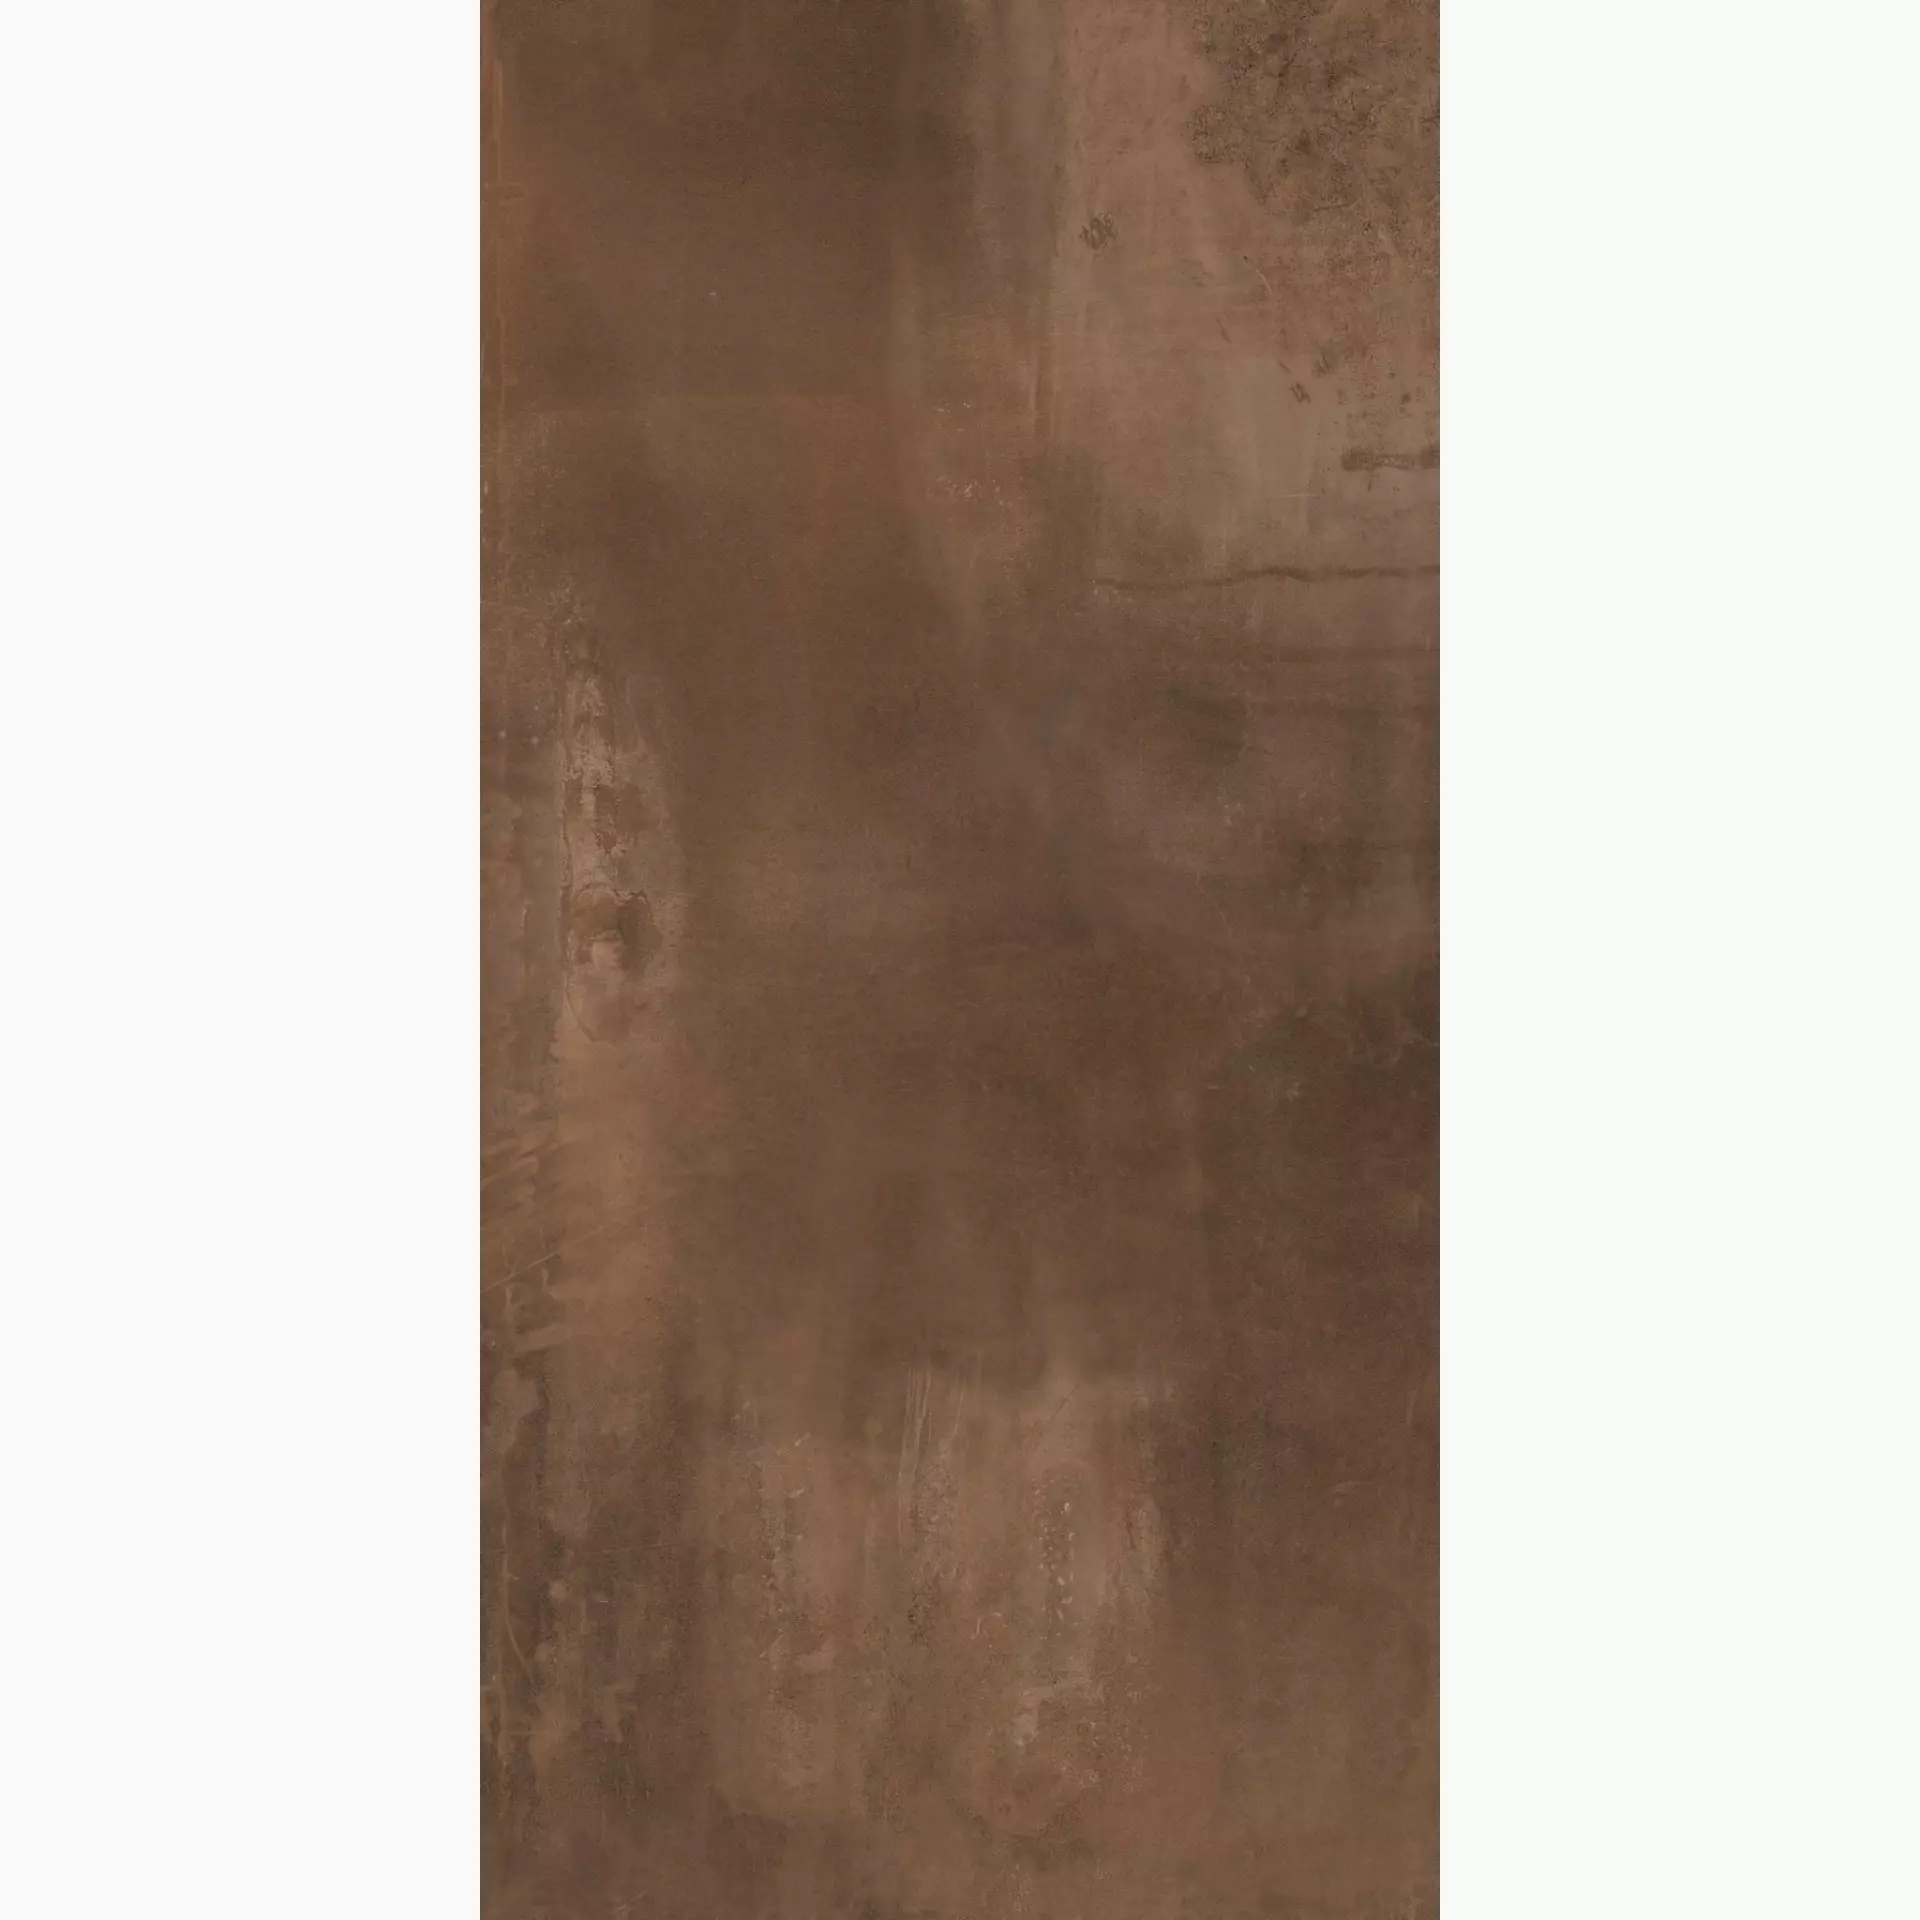 ABK Interno9 Rust Naturale I9R34300 60x120cm rectified 8,5mm